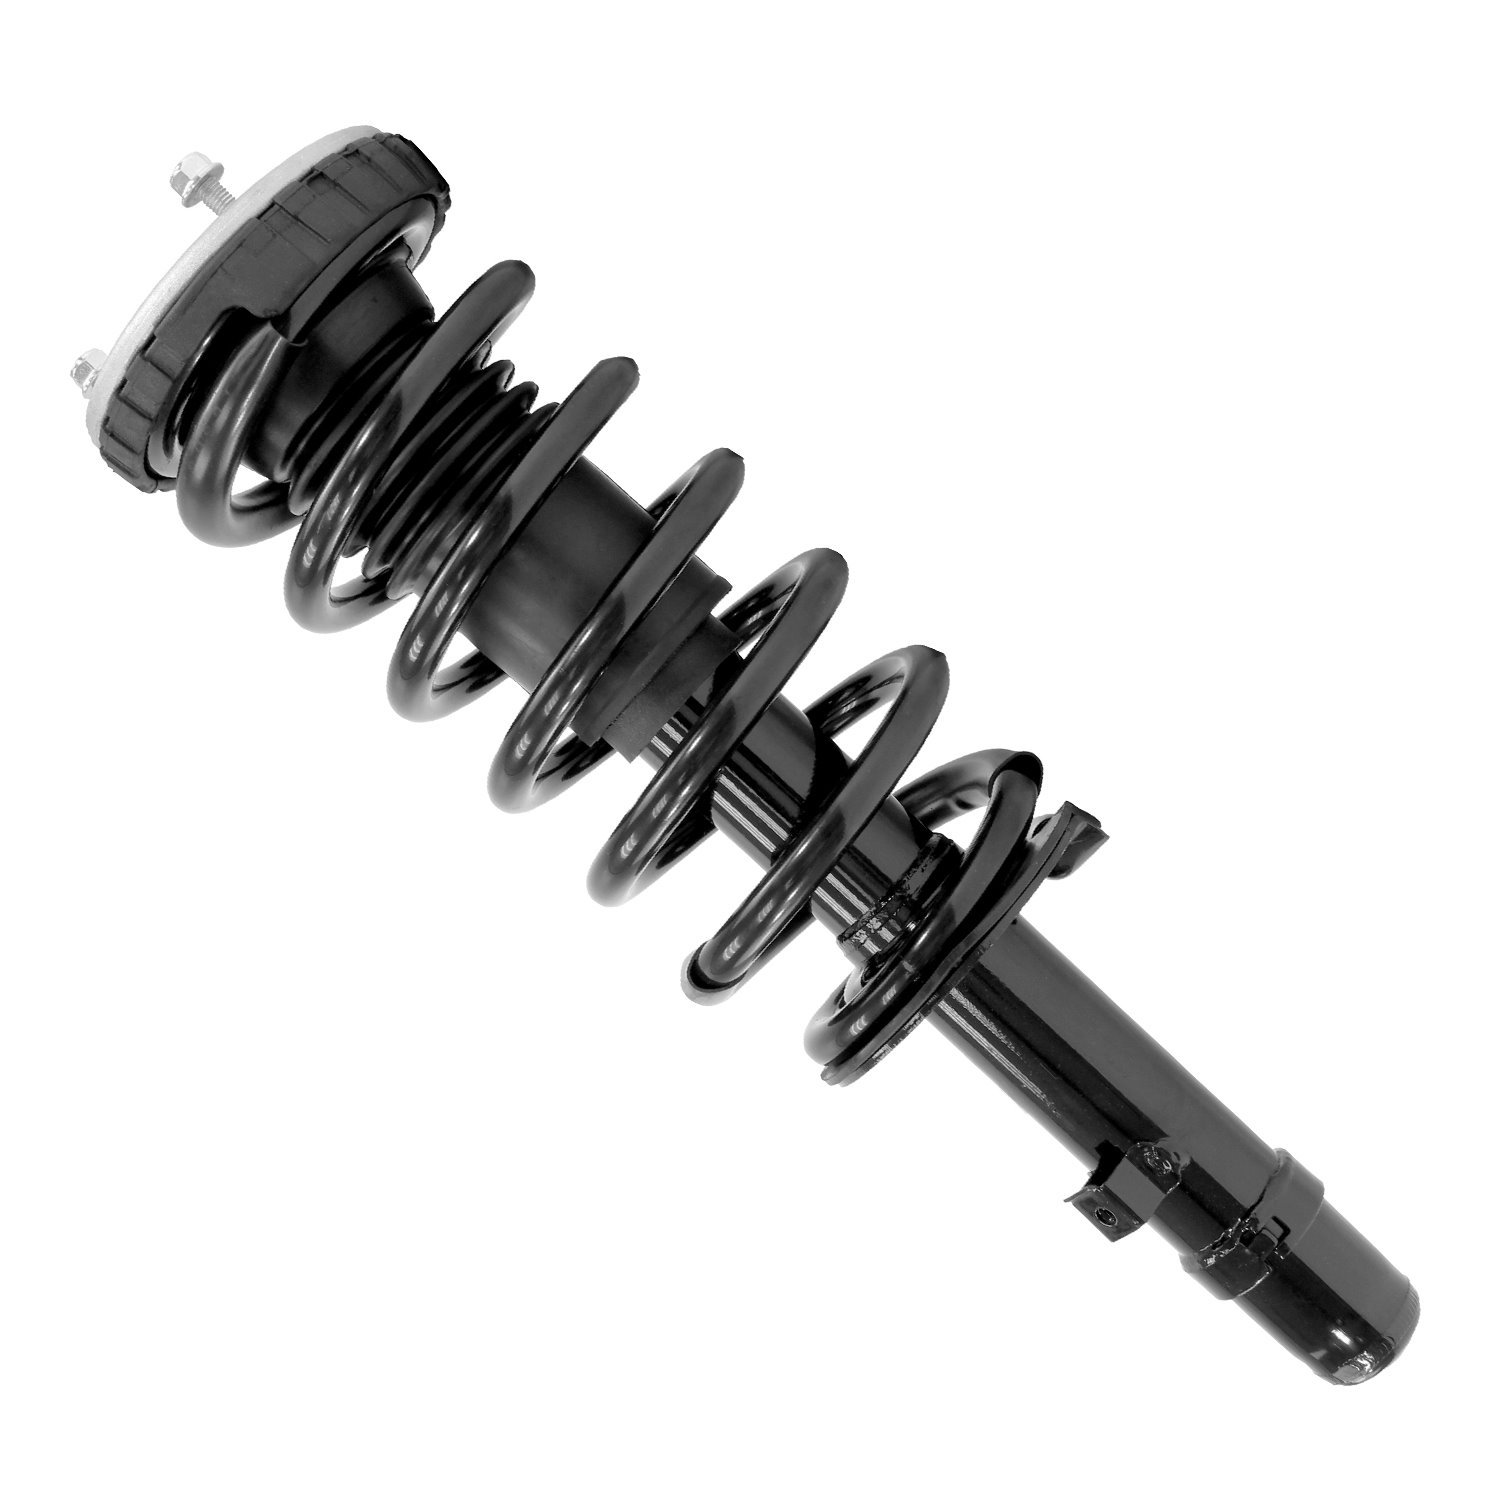 13591 Front Suspension Strut & Coil Spring Assemby Fits Select Genesis G80, Hyundai Genesis